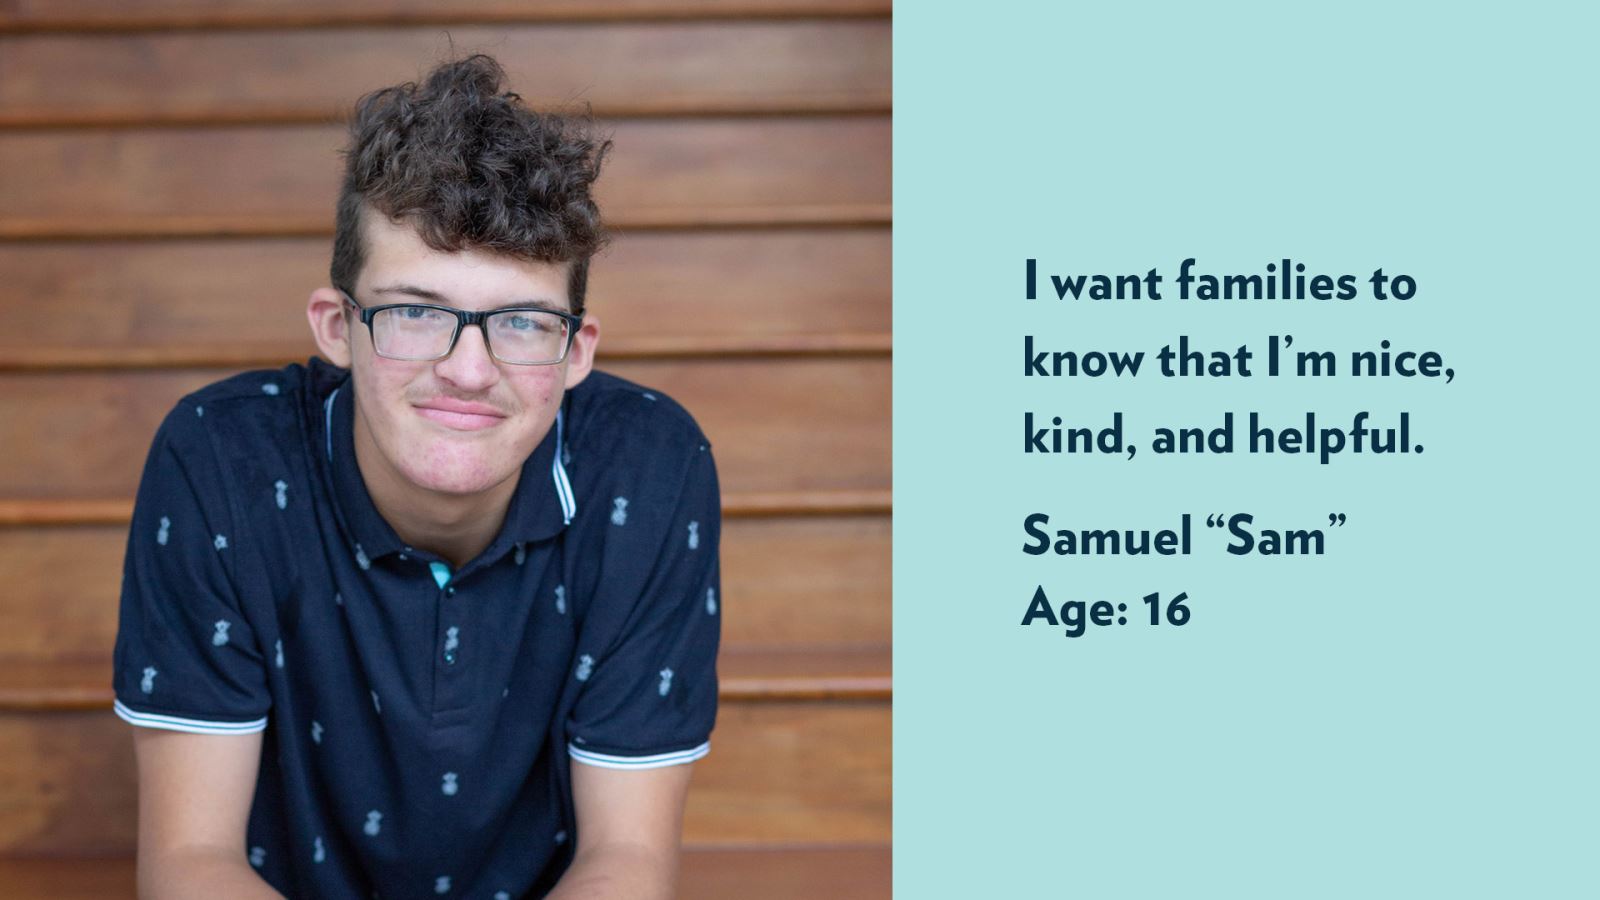 Samuel (Sam), age 16. I want families to know that I’m nice, kind, and helpful.